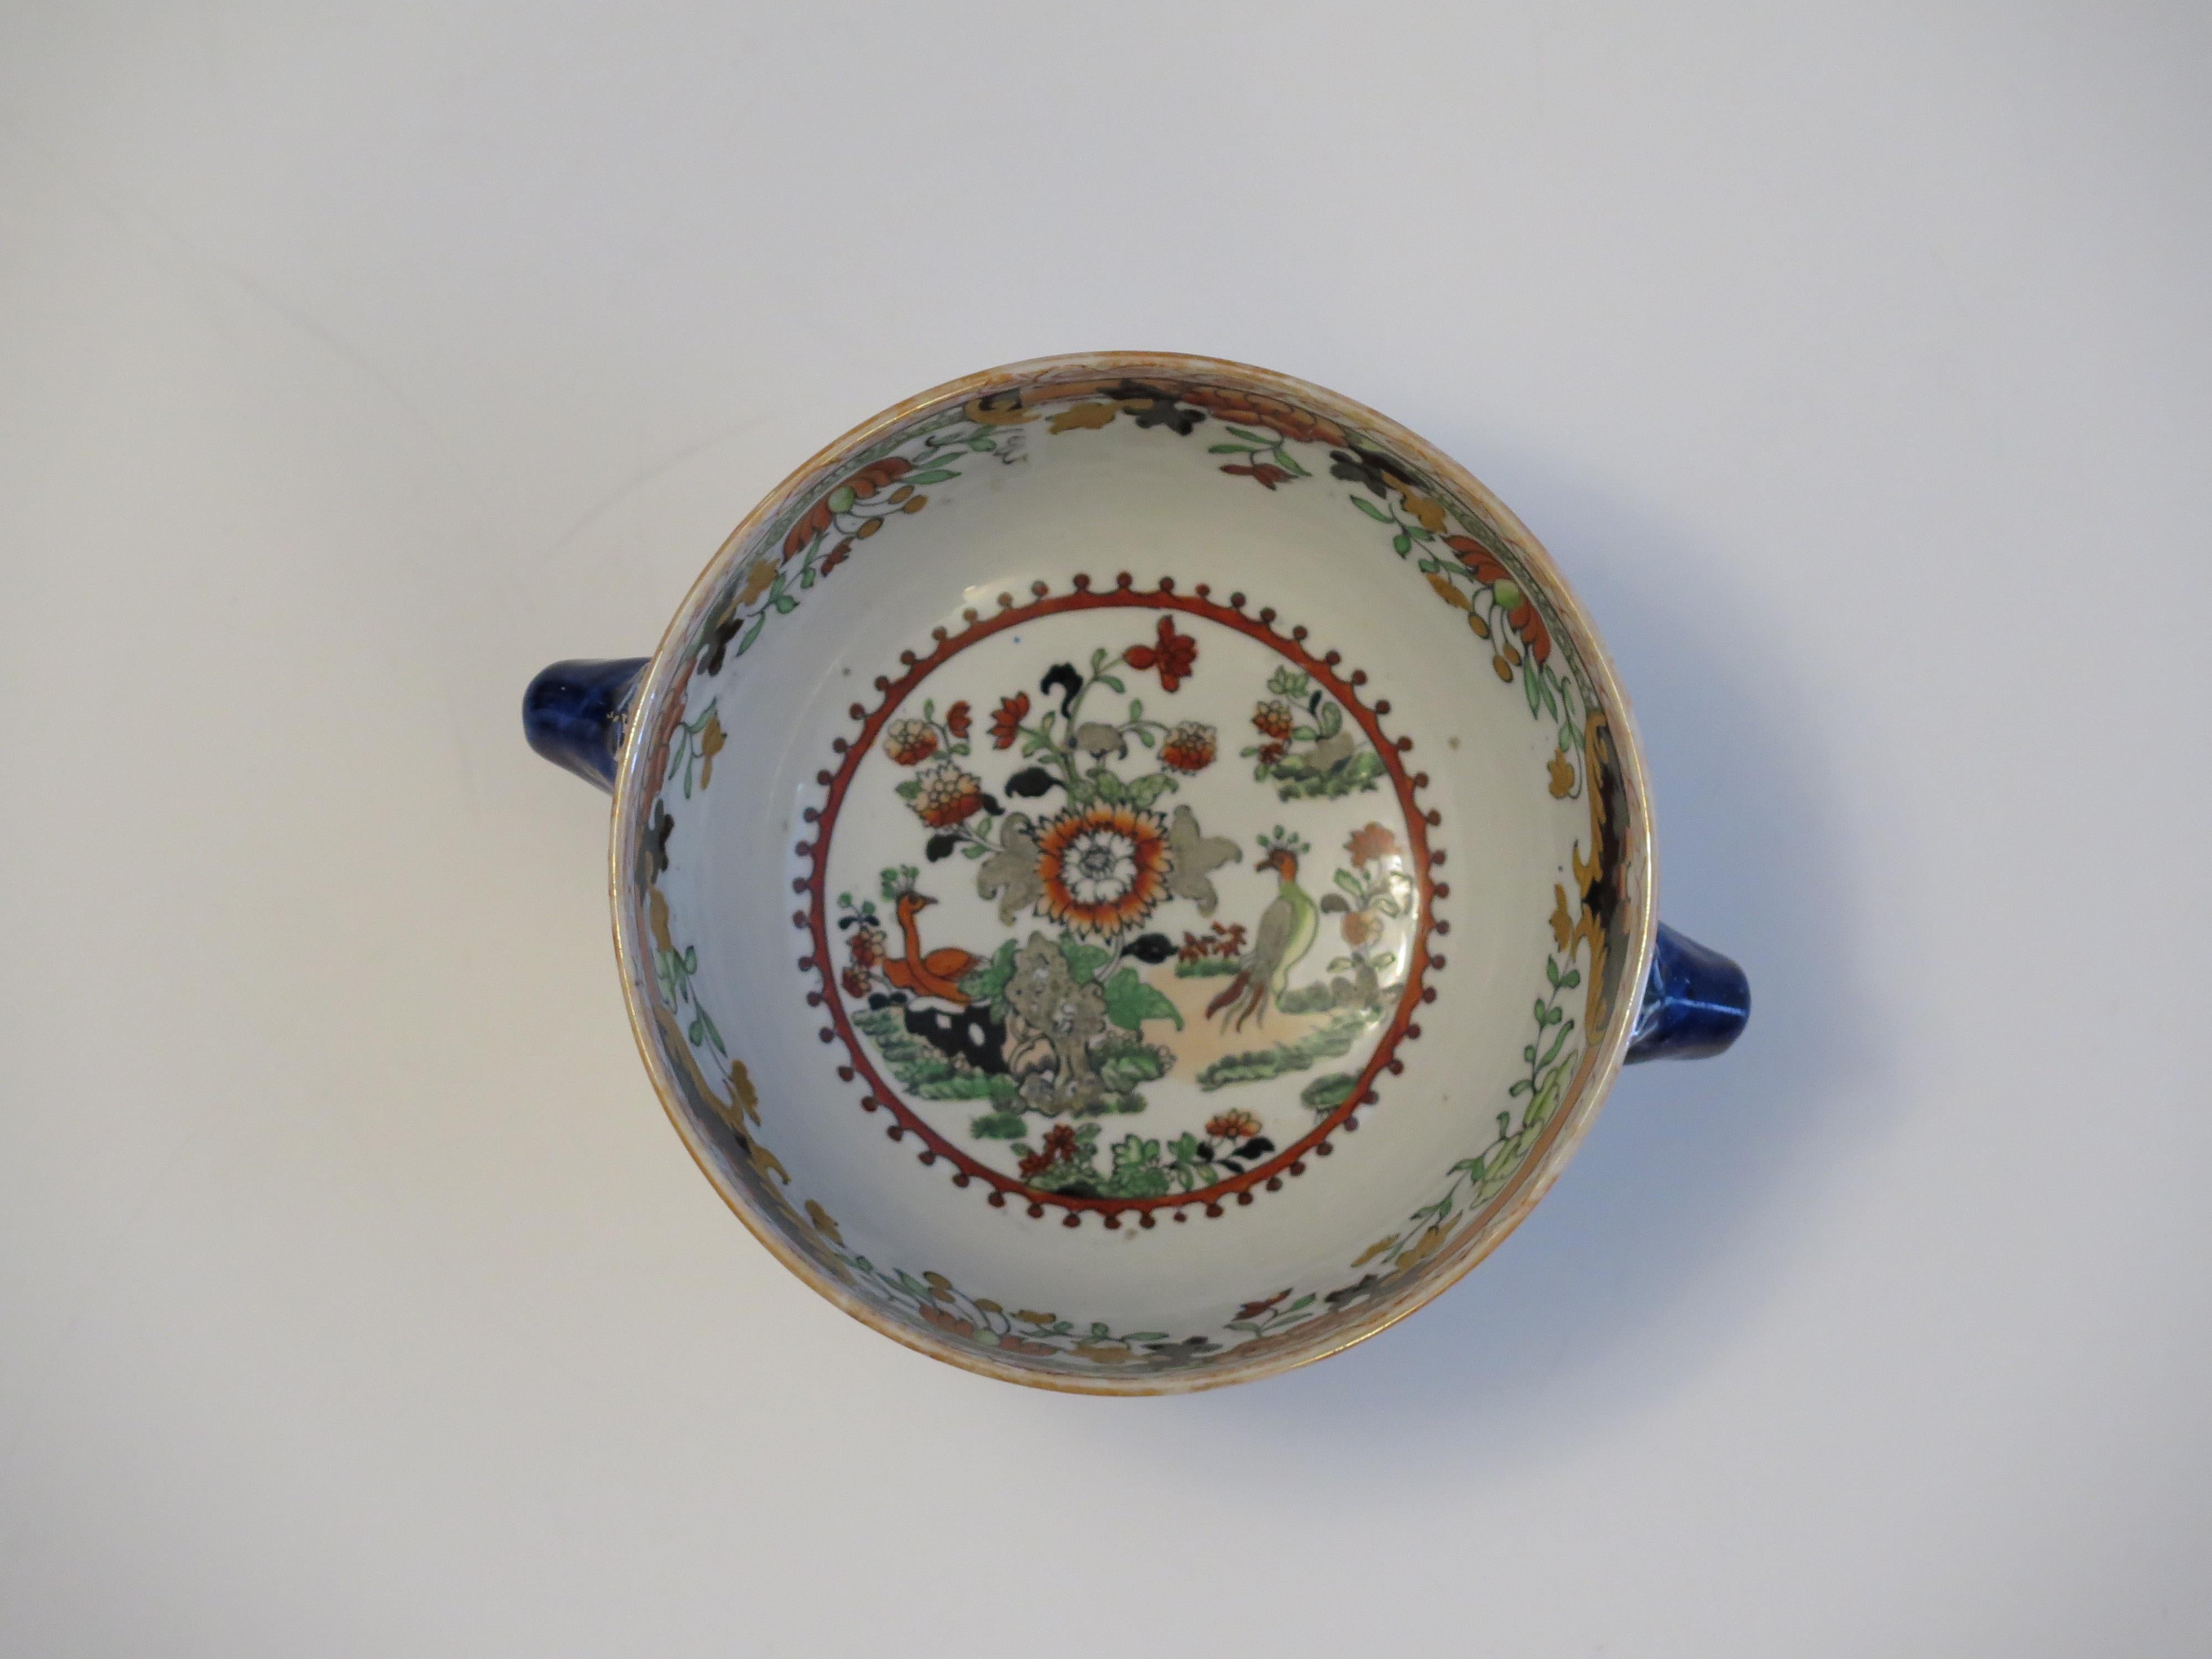 Chinoiserie Masons Ironstone Bowl in Peacock Peony & Rock hand painted Pattern, circa 1838 For Sale